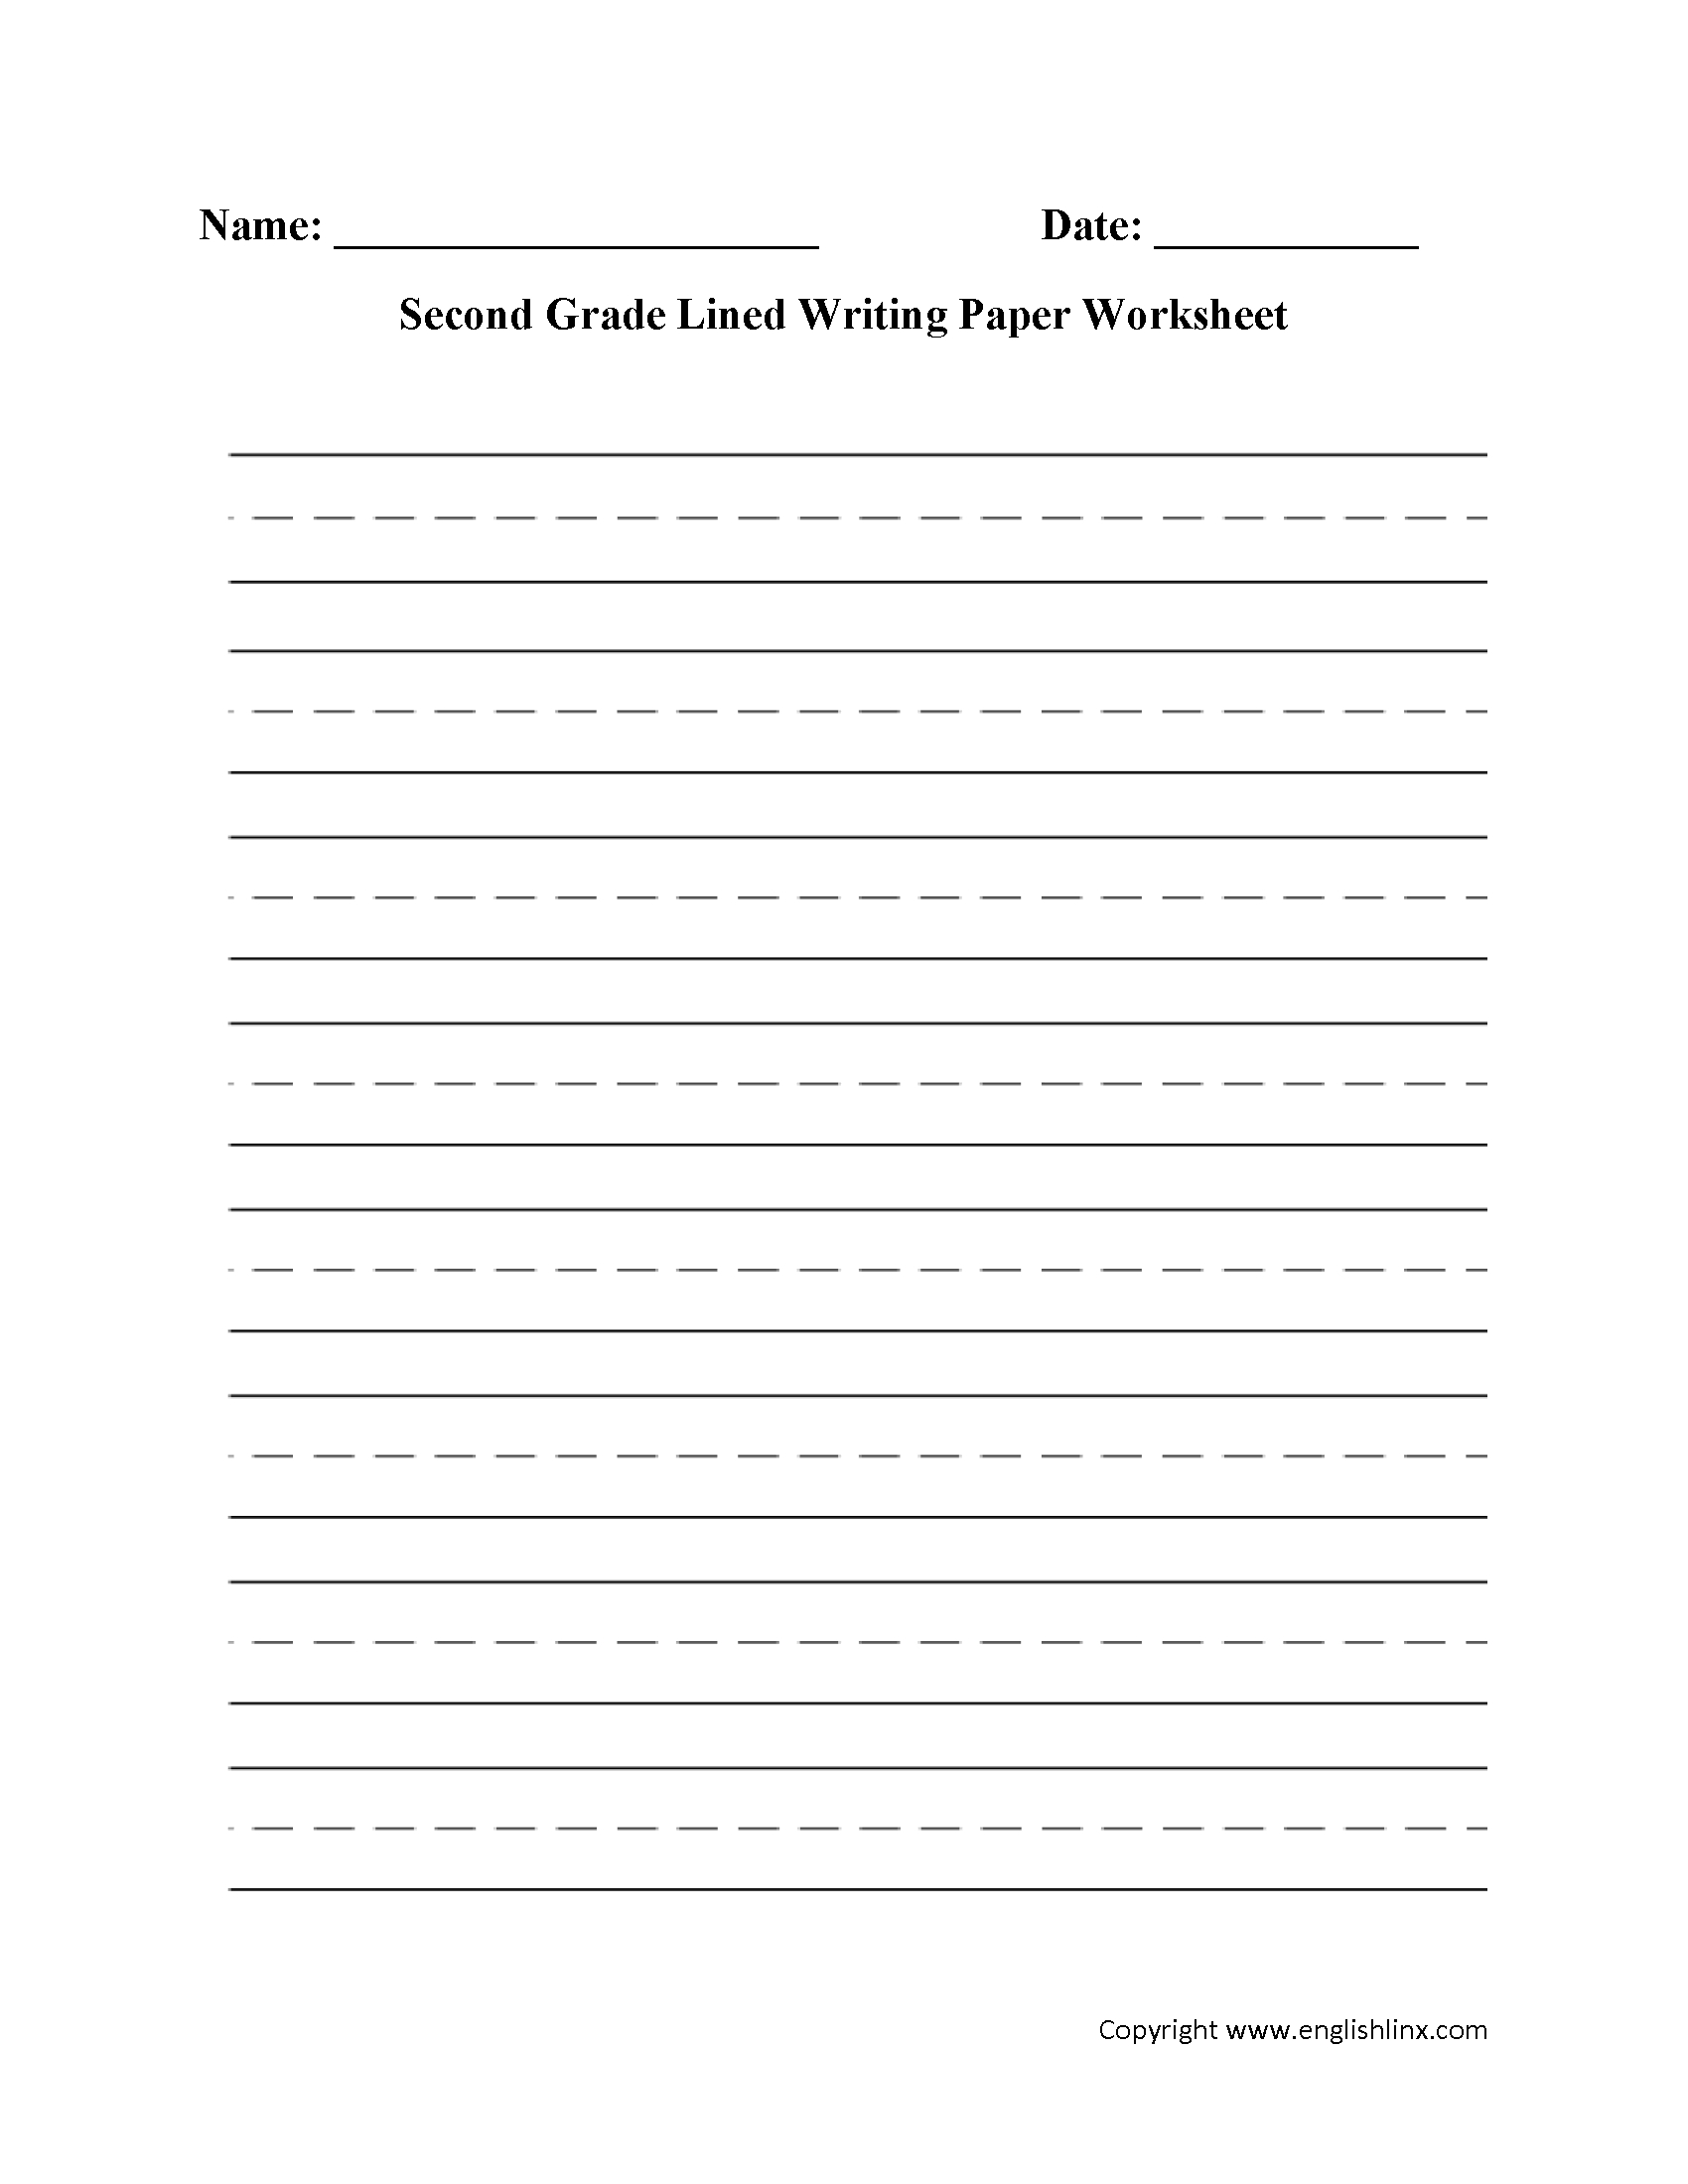 Writing Worksheets  Lined Writing Paper Worksheets In 2Nd Grade Writing Worksheets